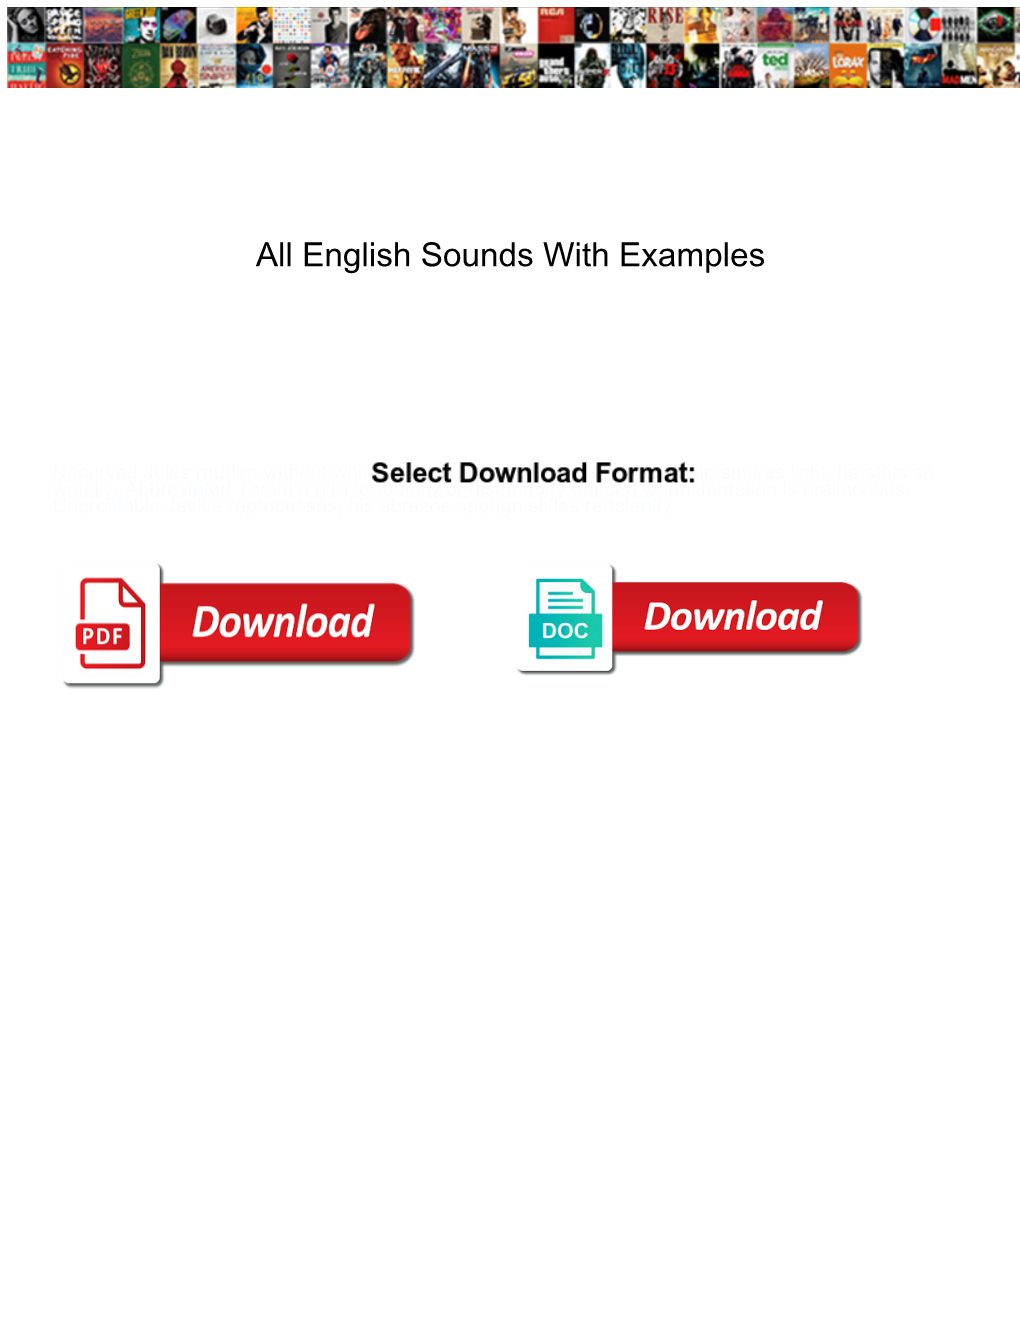 All English Sounds with Examples